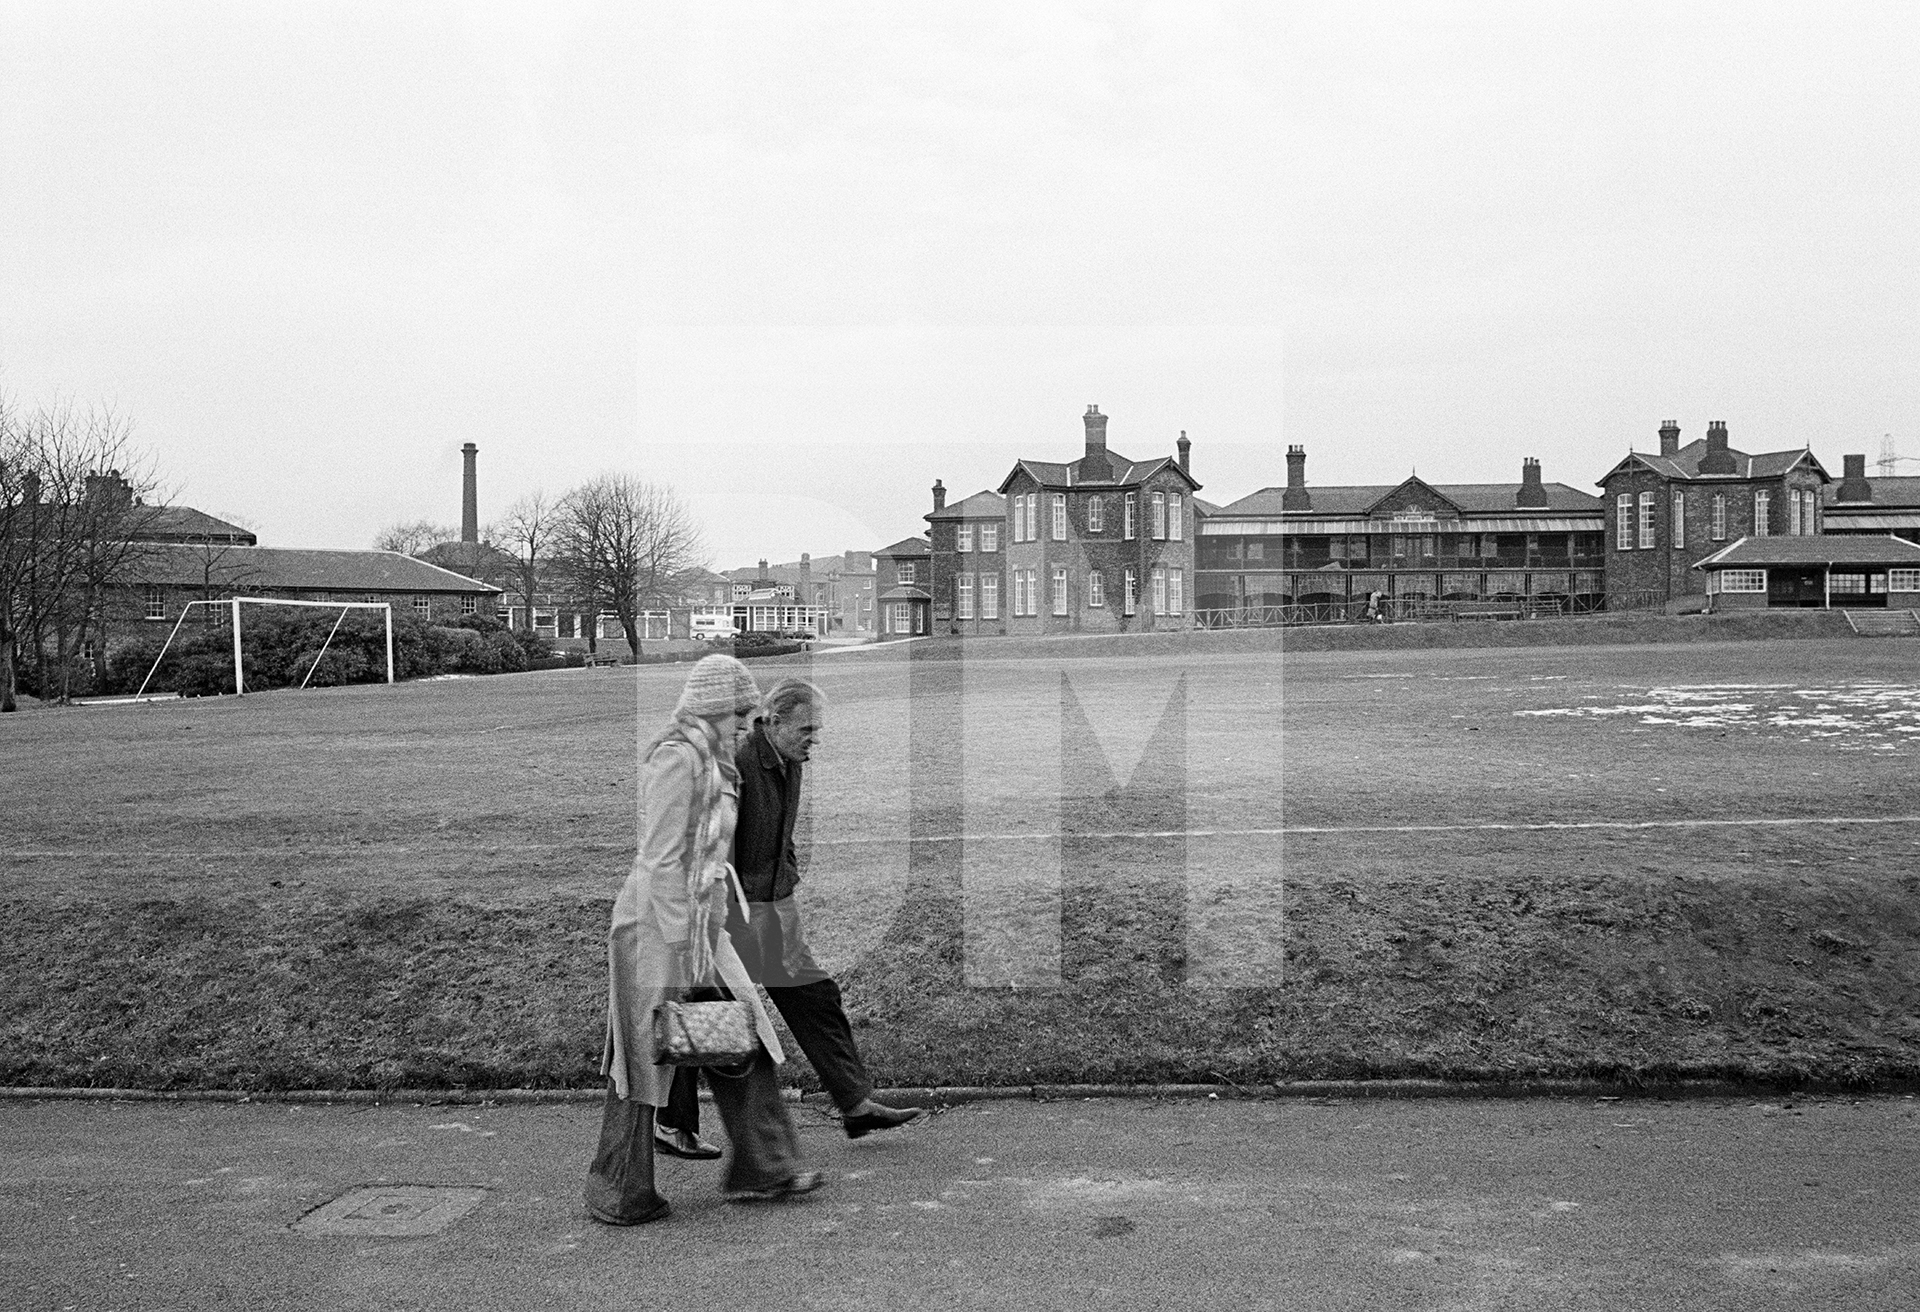 Staff and patients participate in a behaviour modification token economy scheme. Here George Quann, aged 52 a former labourer who was admitted in 1952, is accompanied on a walk in the hospital grounds. February 1978 by Daniel Meadows